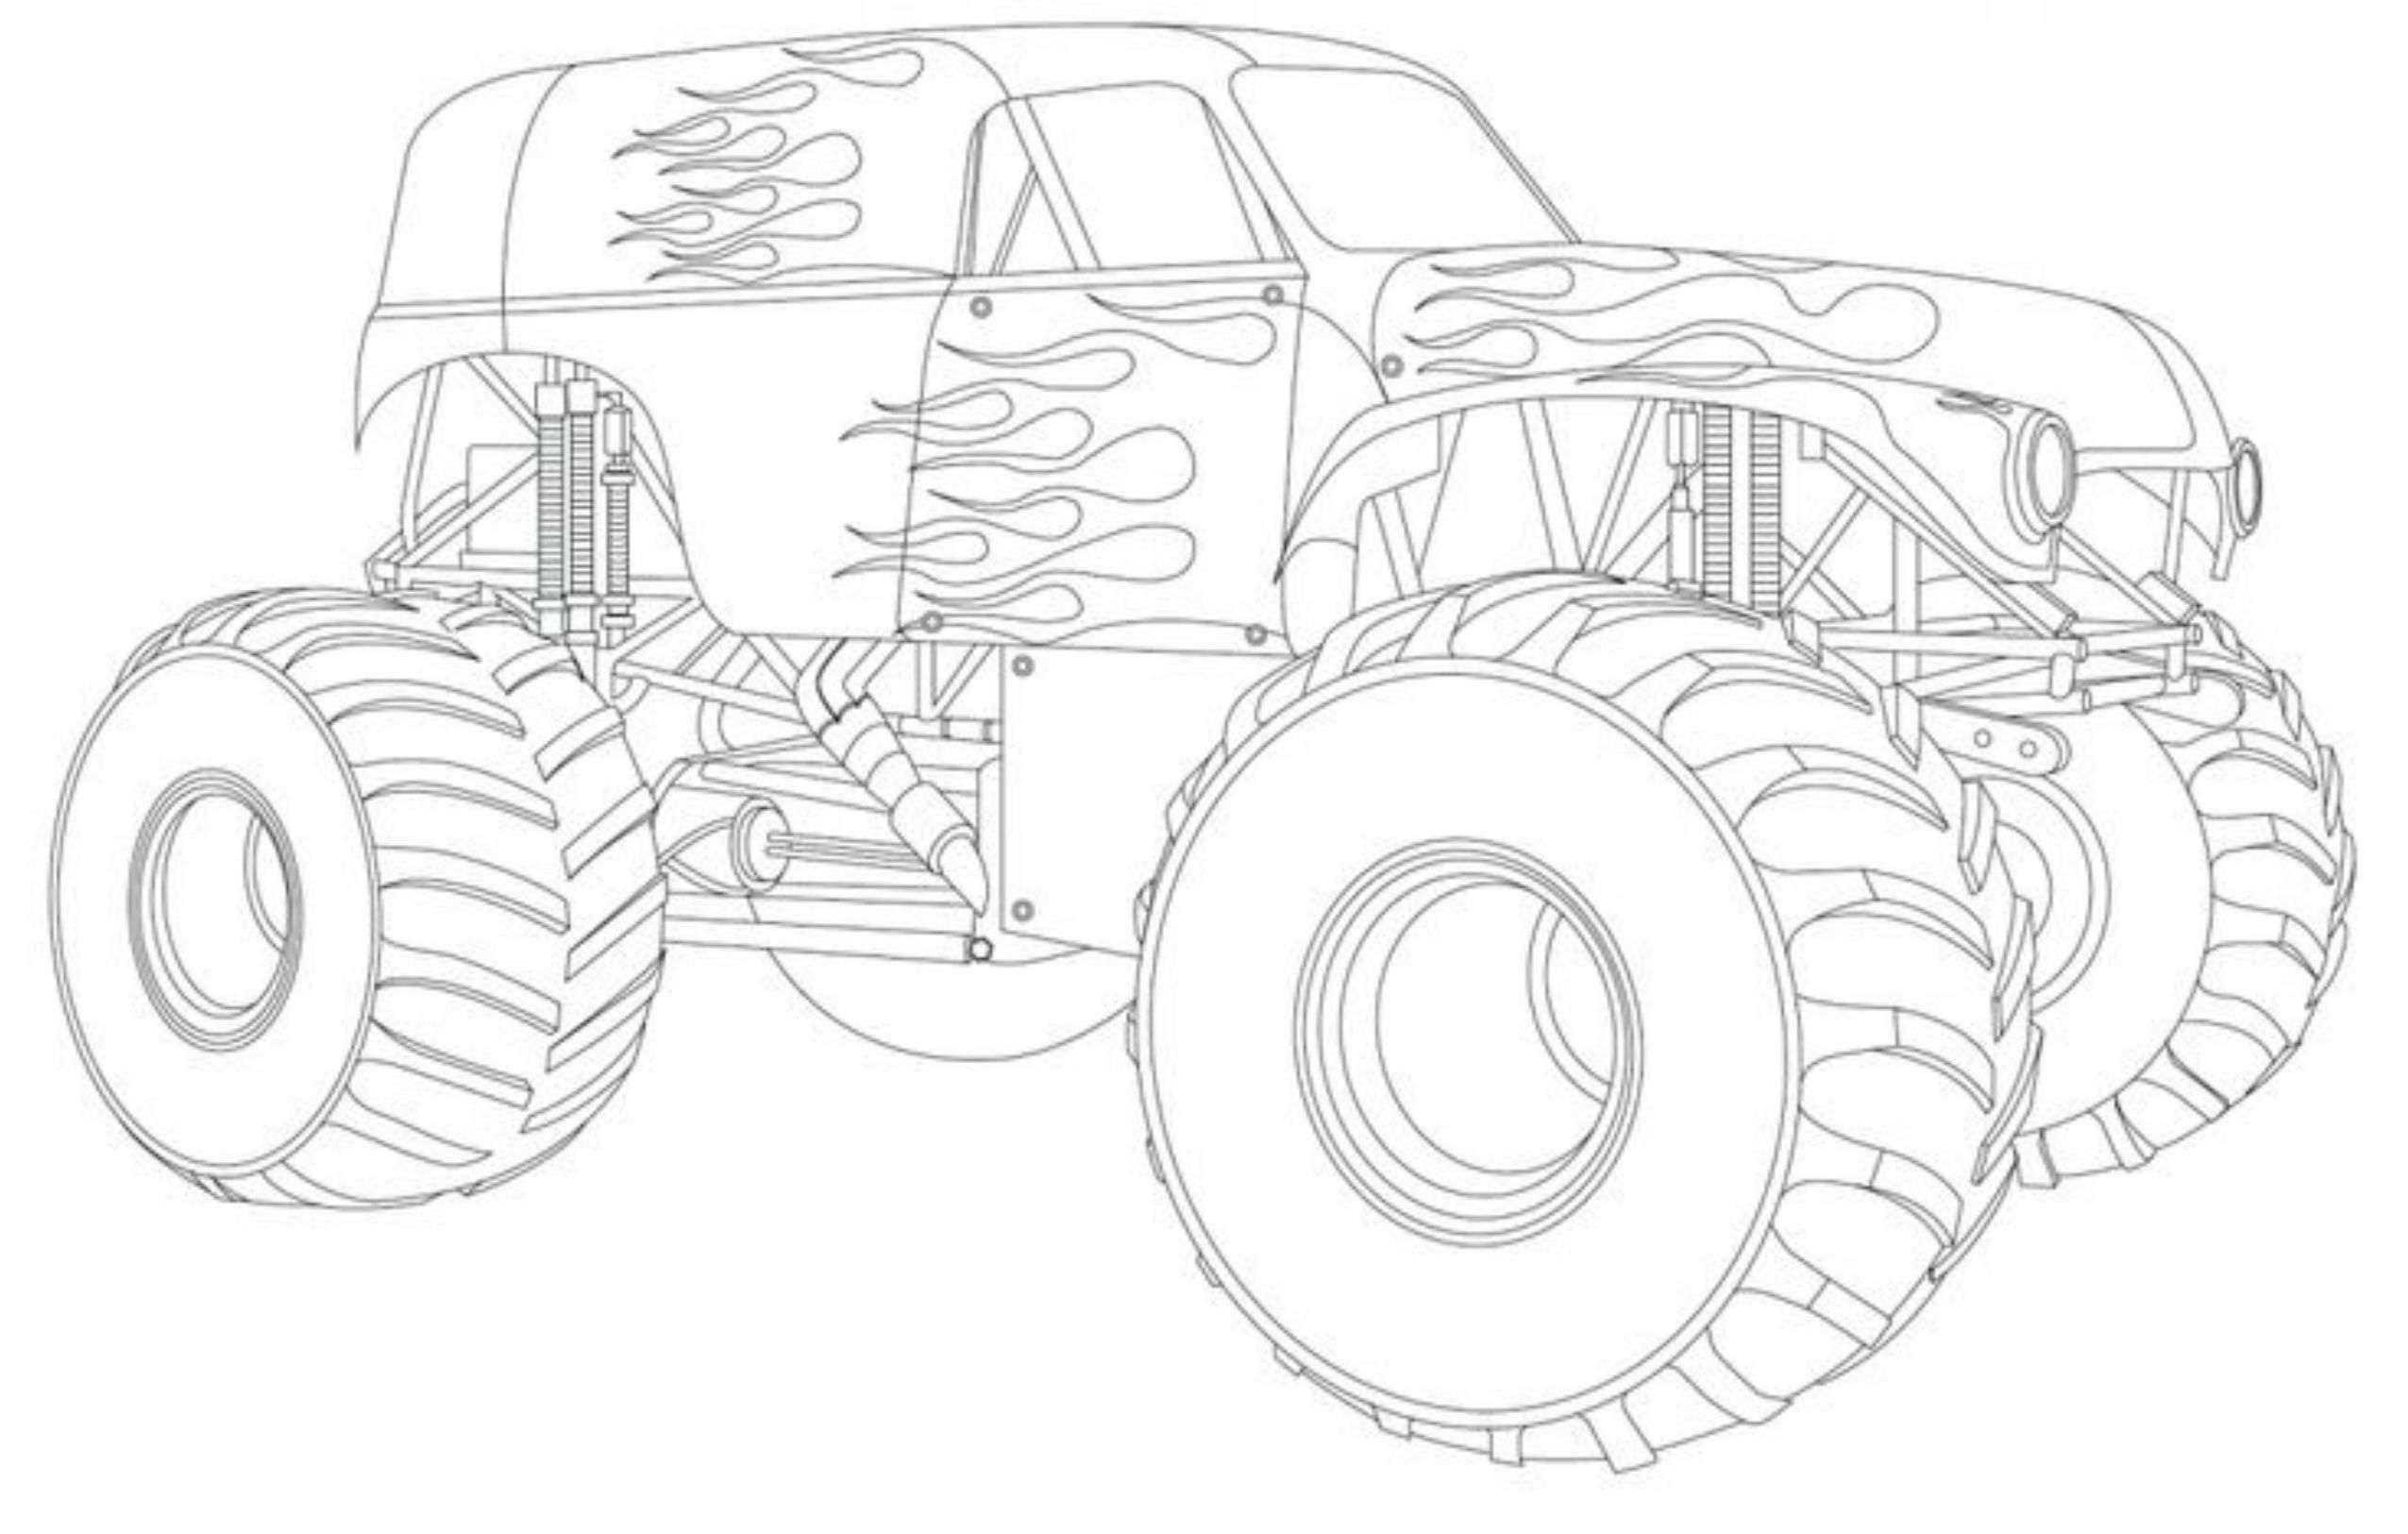 Grave Digger Coloring Pages
 Monster Trucks Coloring Pages coloringsuite